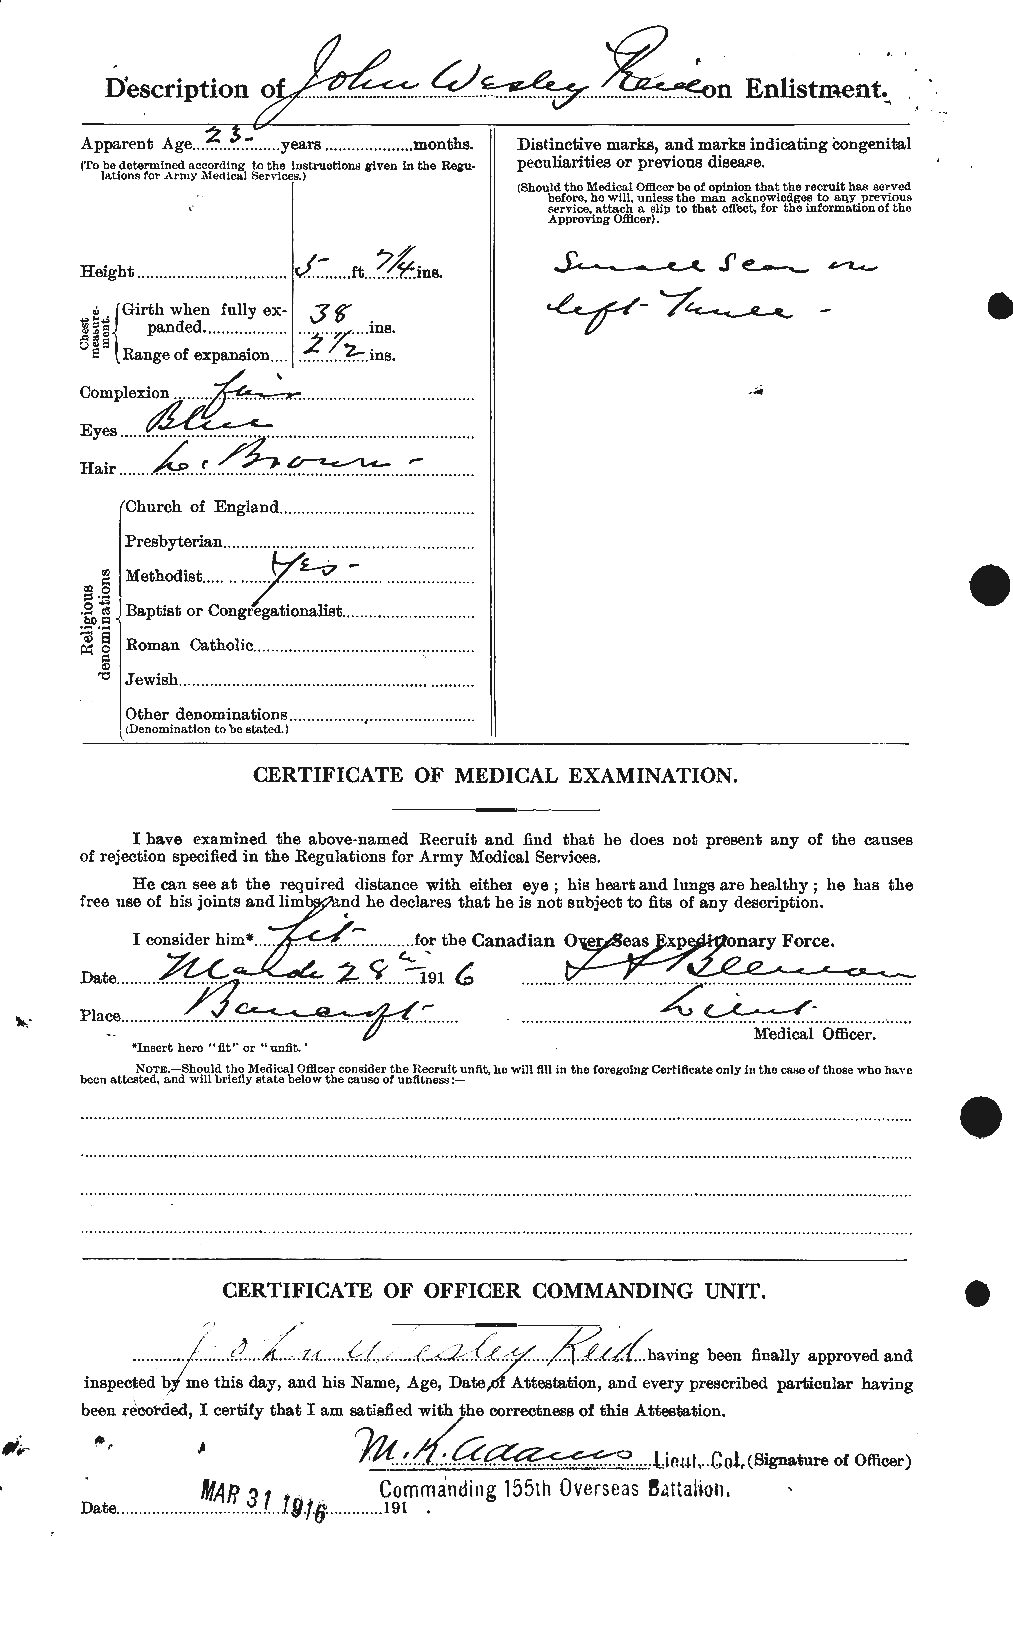 Personnel Records of the First World War - CEF 598880b